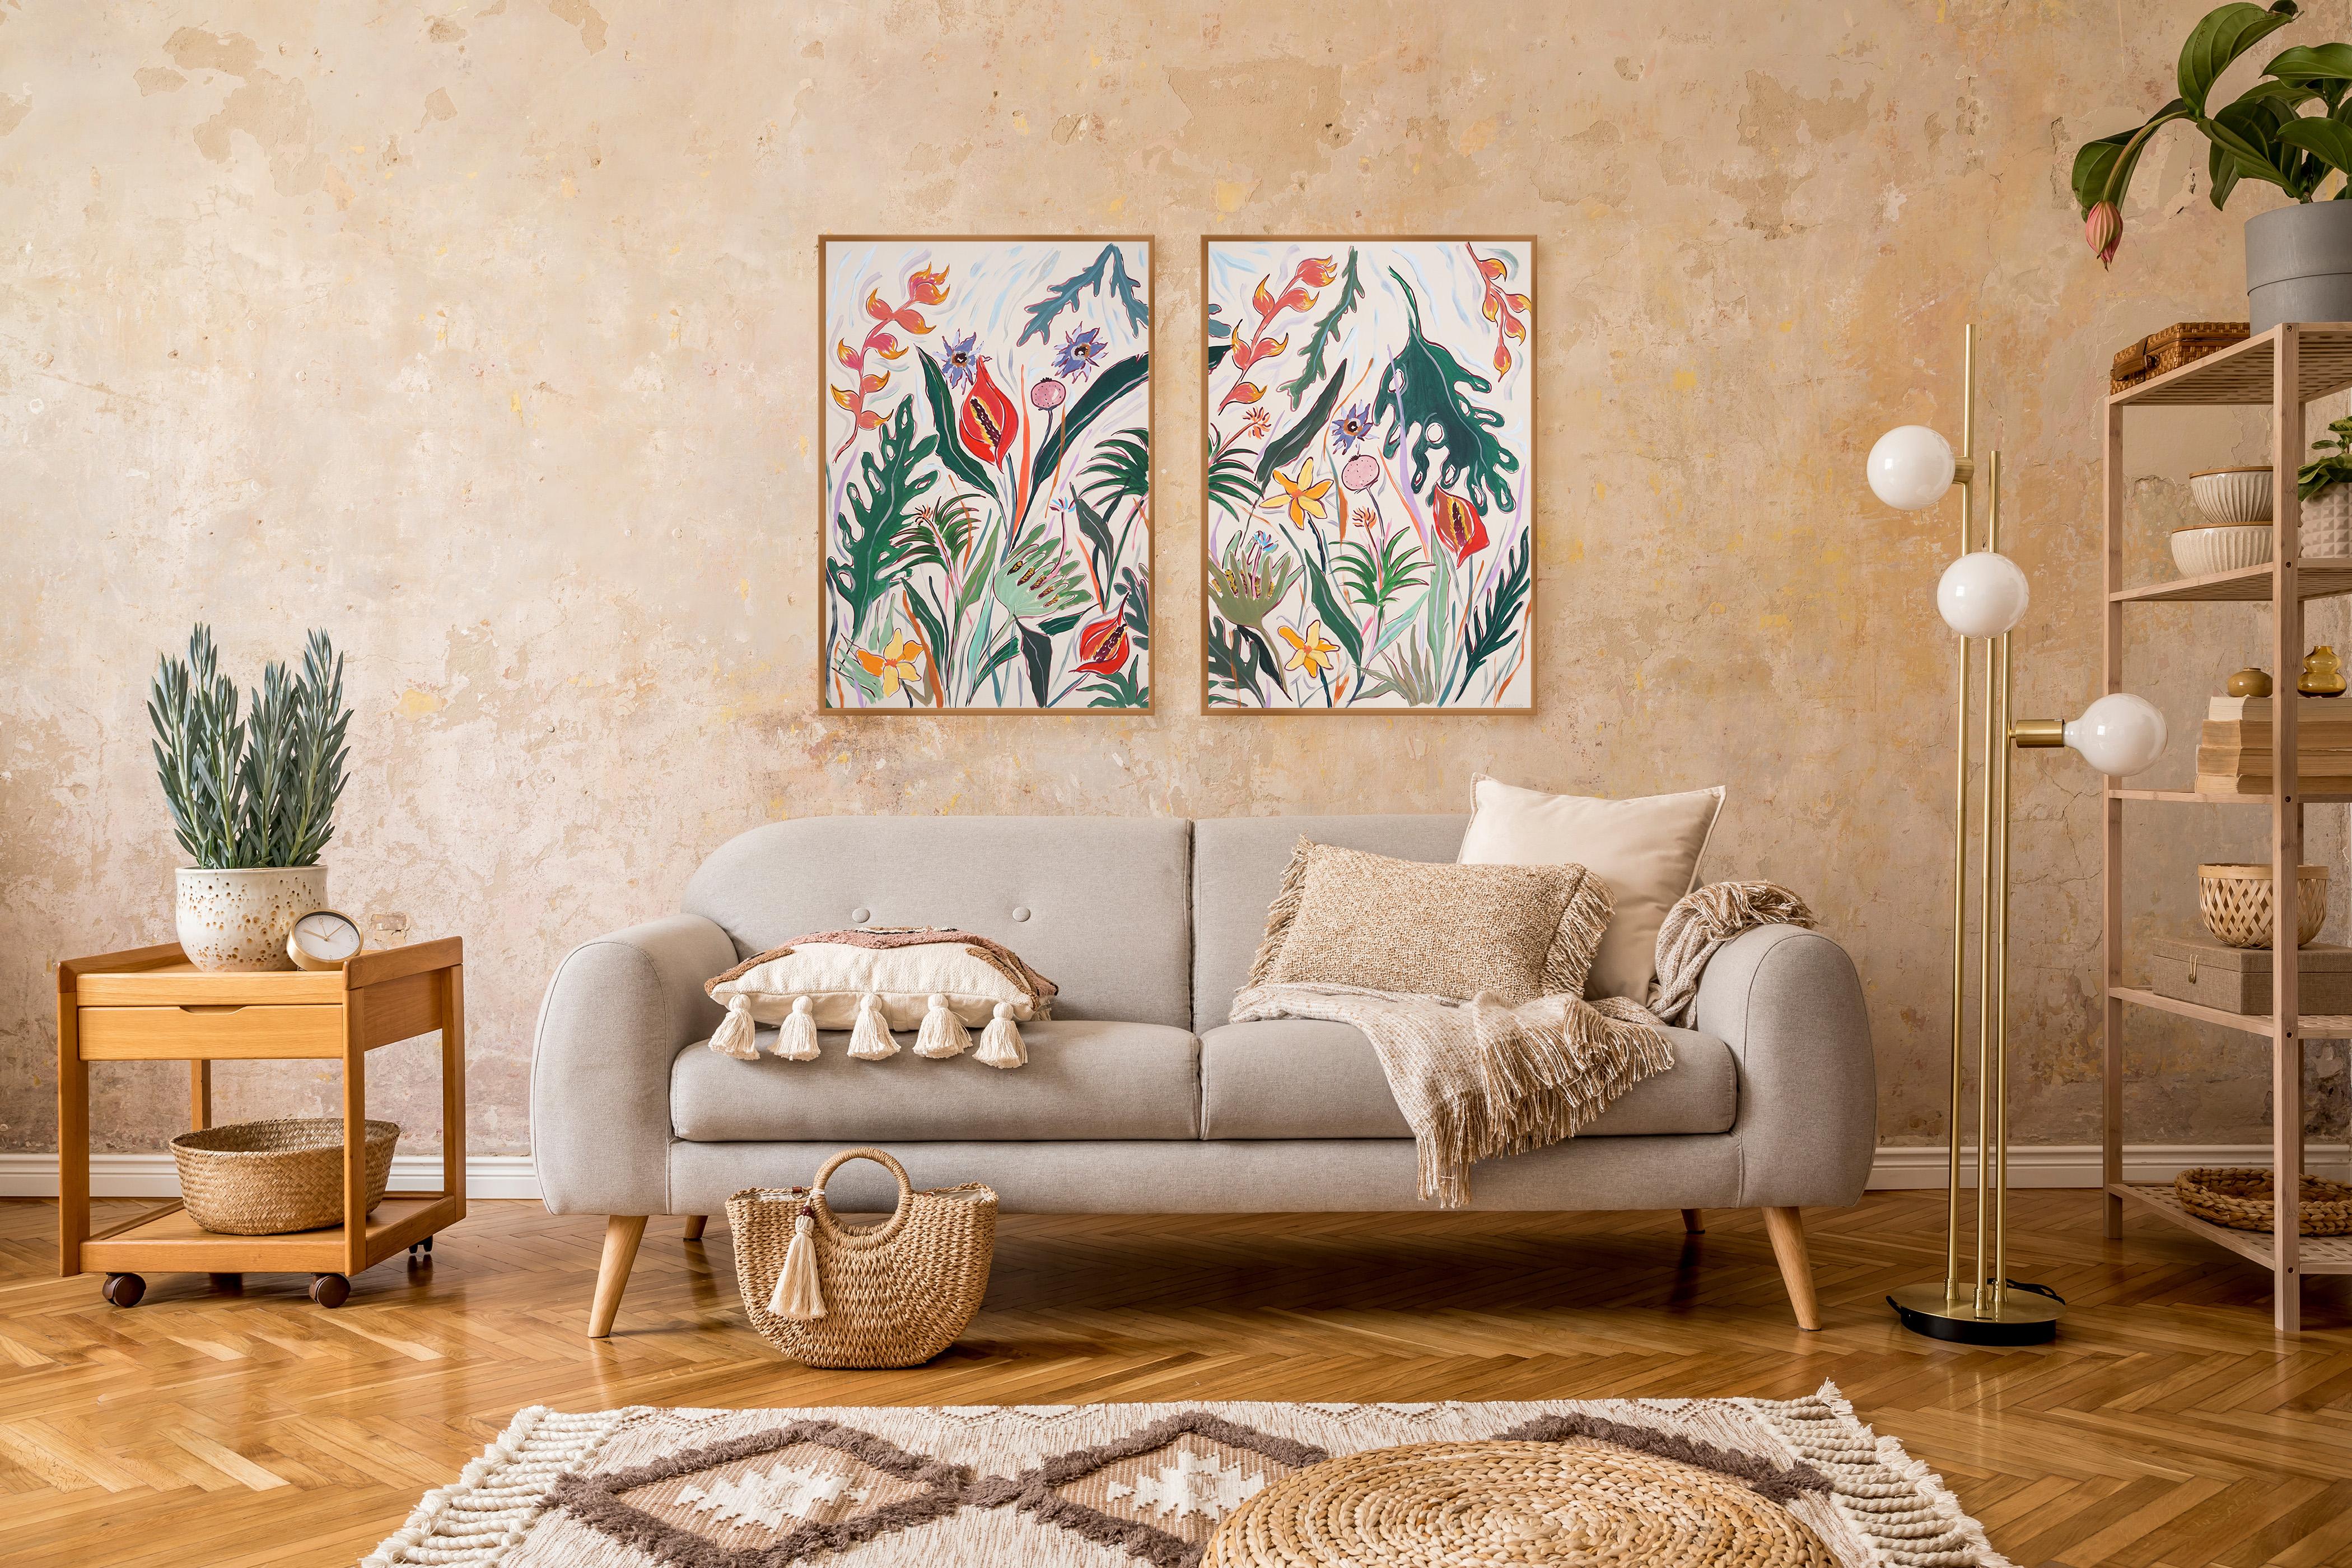 Tropical Flowers Garden, Illustration Style Diptych, Flamingo Plant Red Laceleaf 1